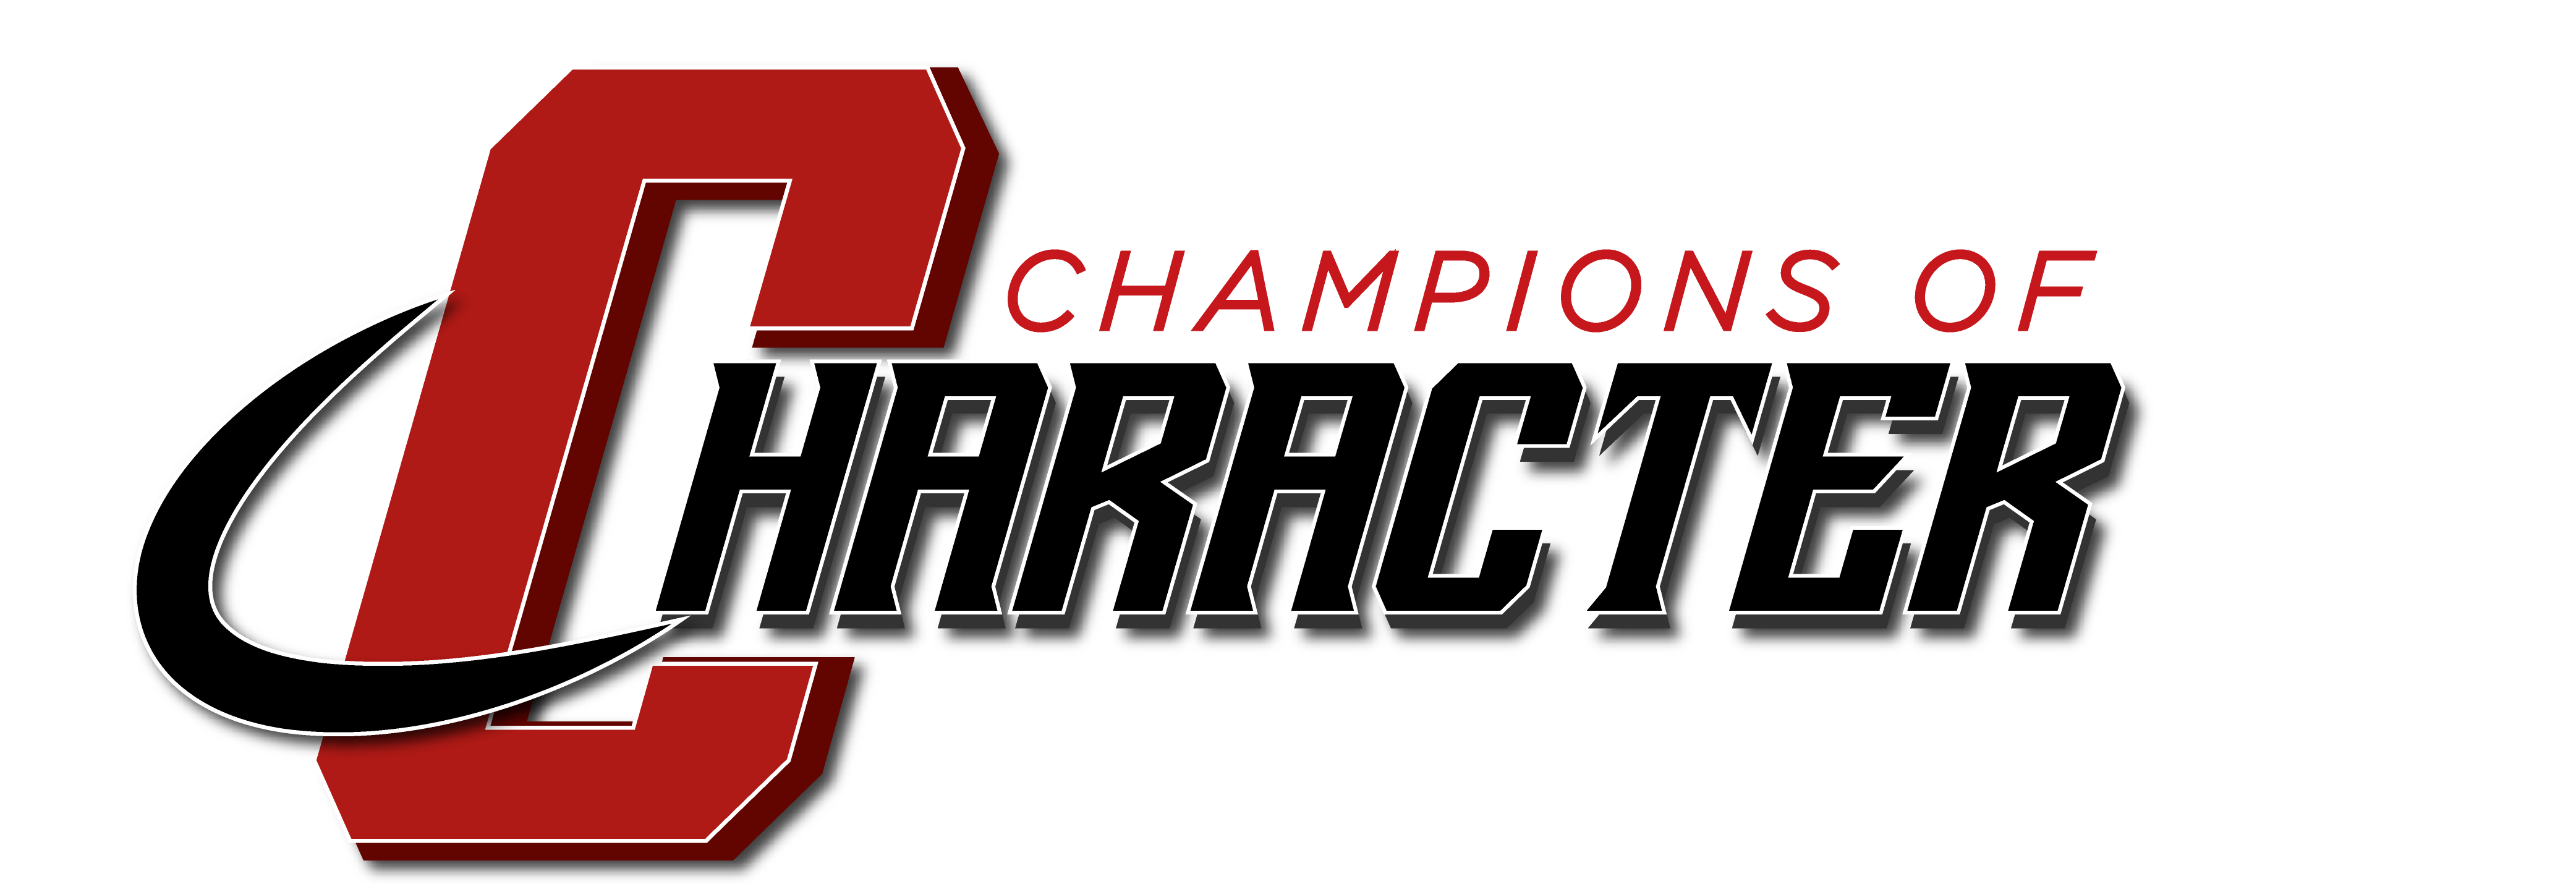 Champions of Character